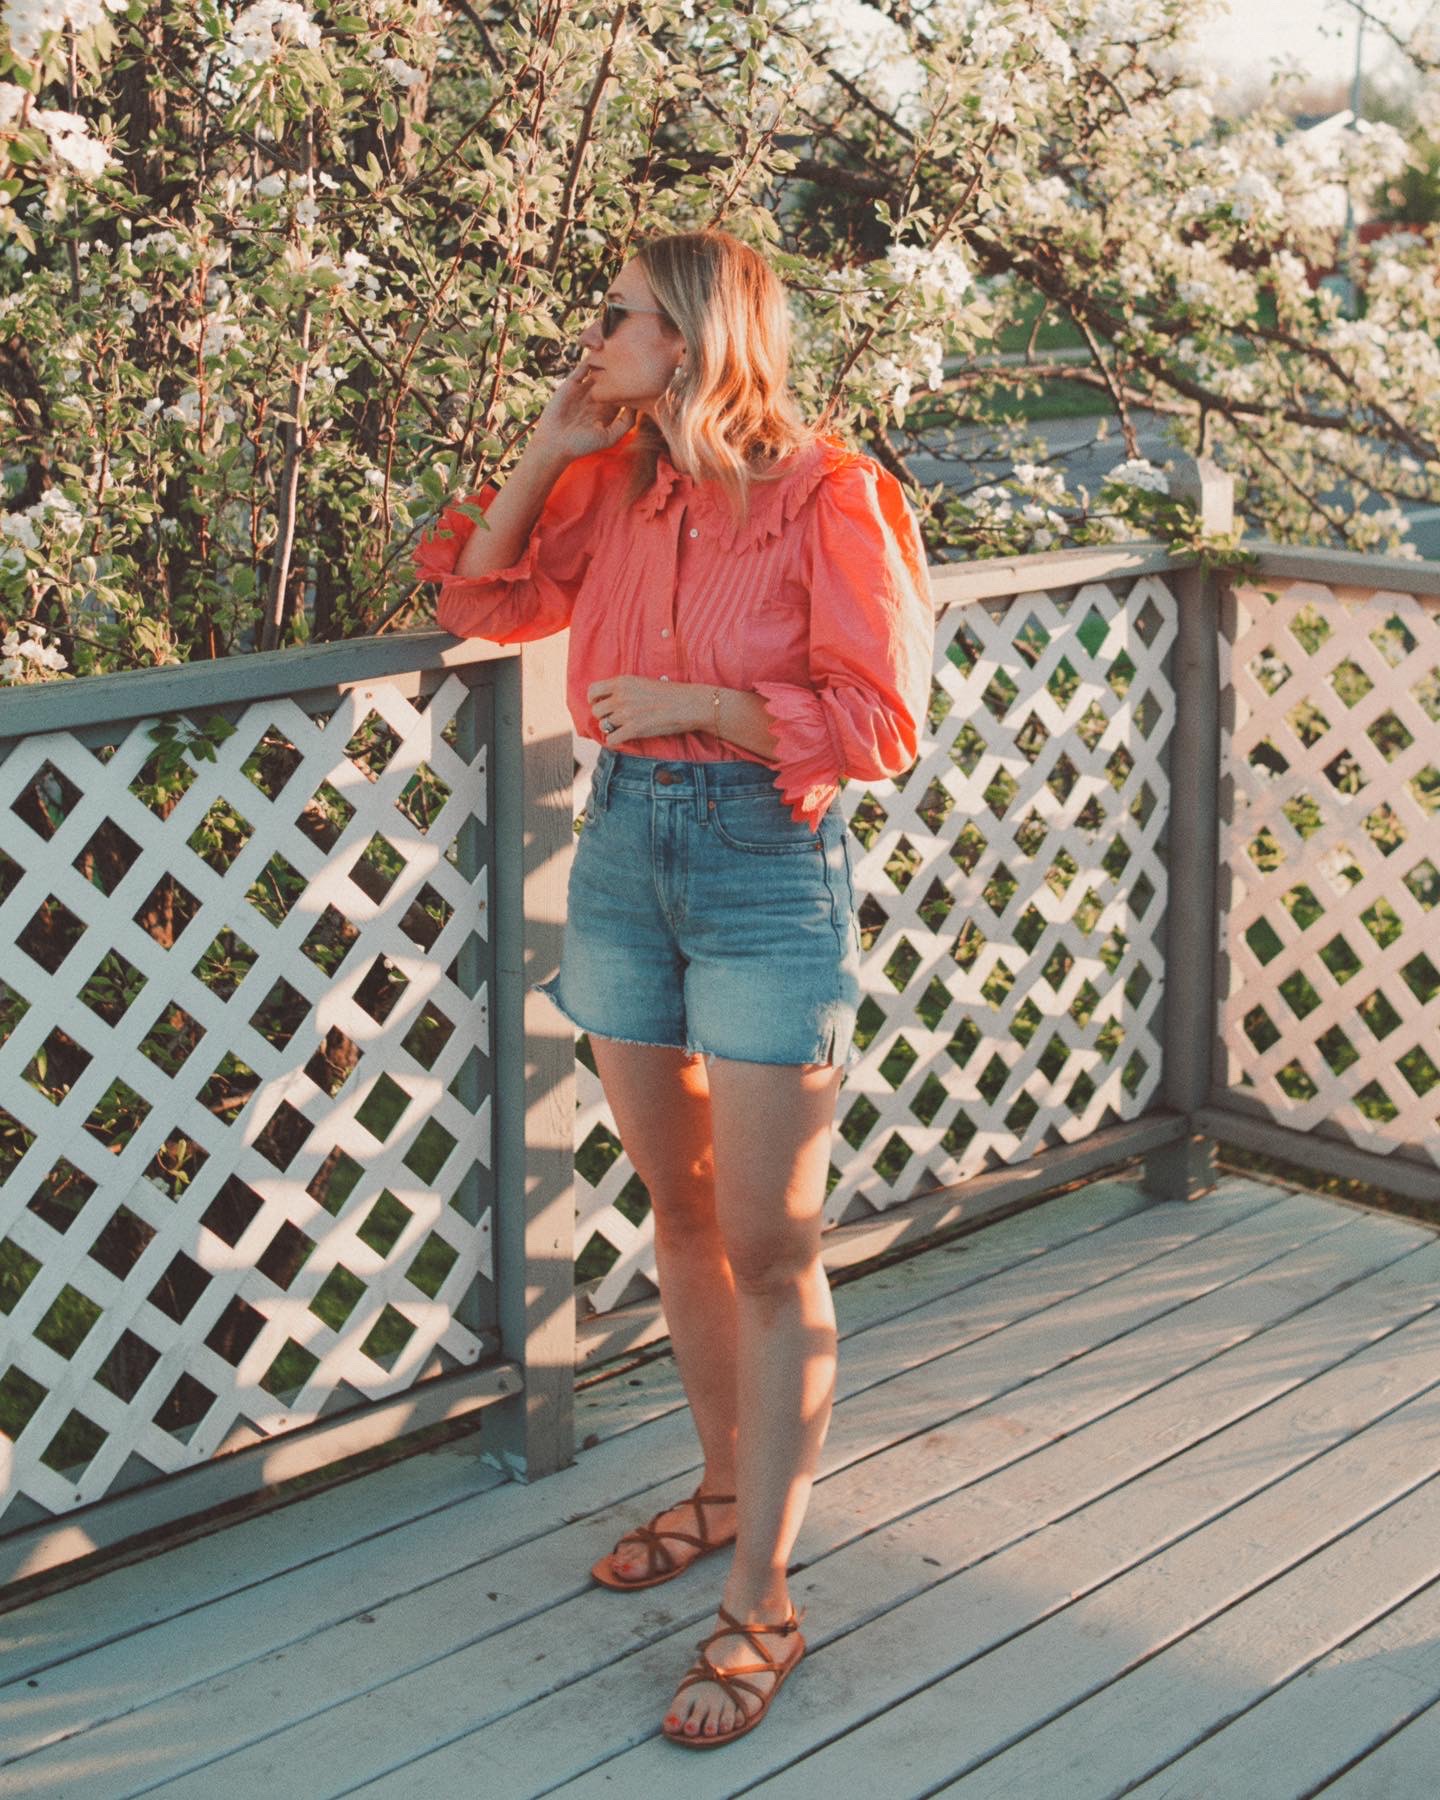 Karin Emily wears her favorite denim shorts with a pink blouse